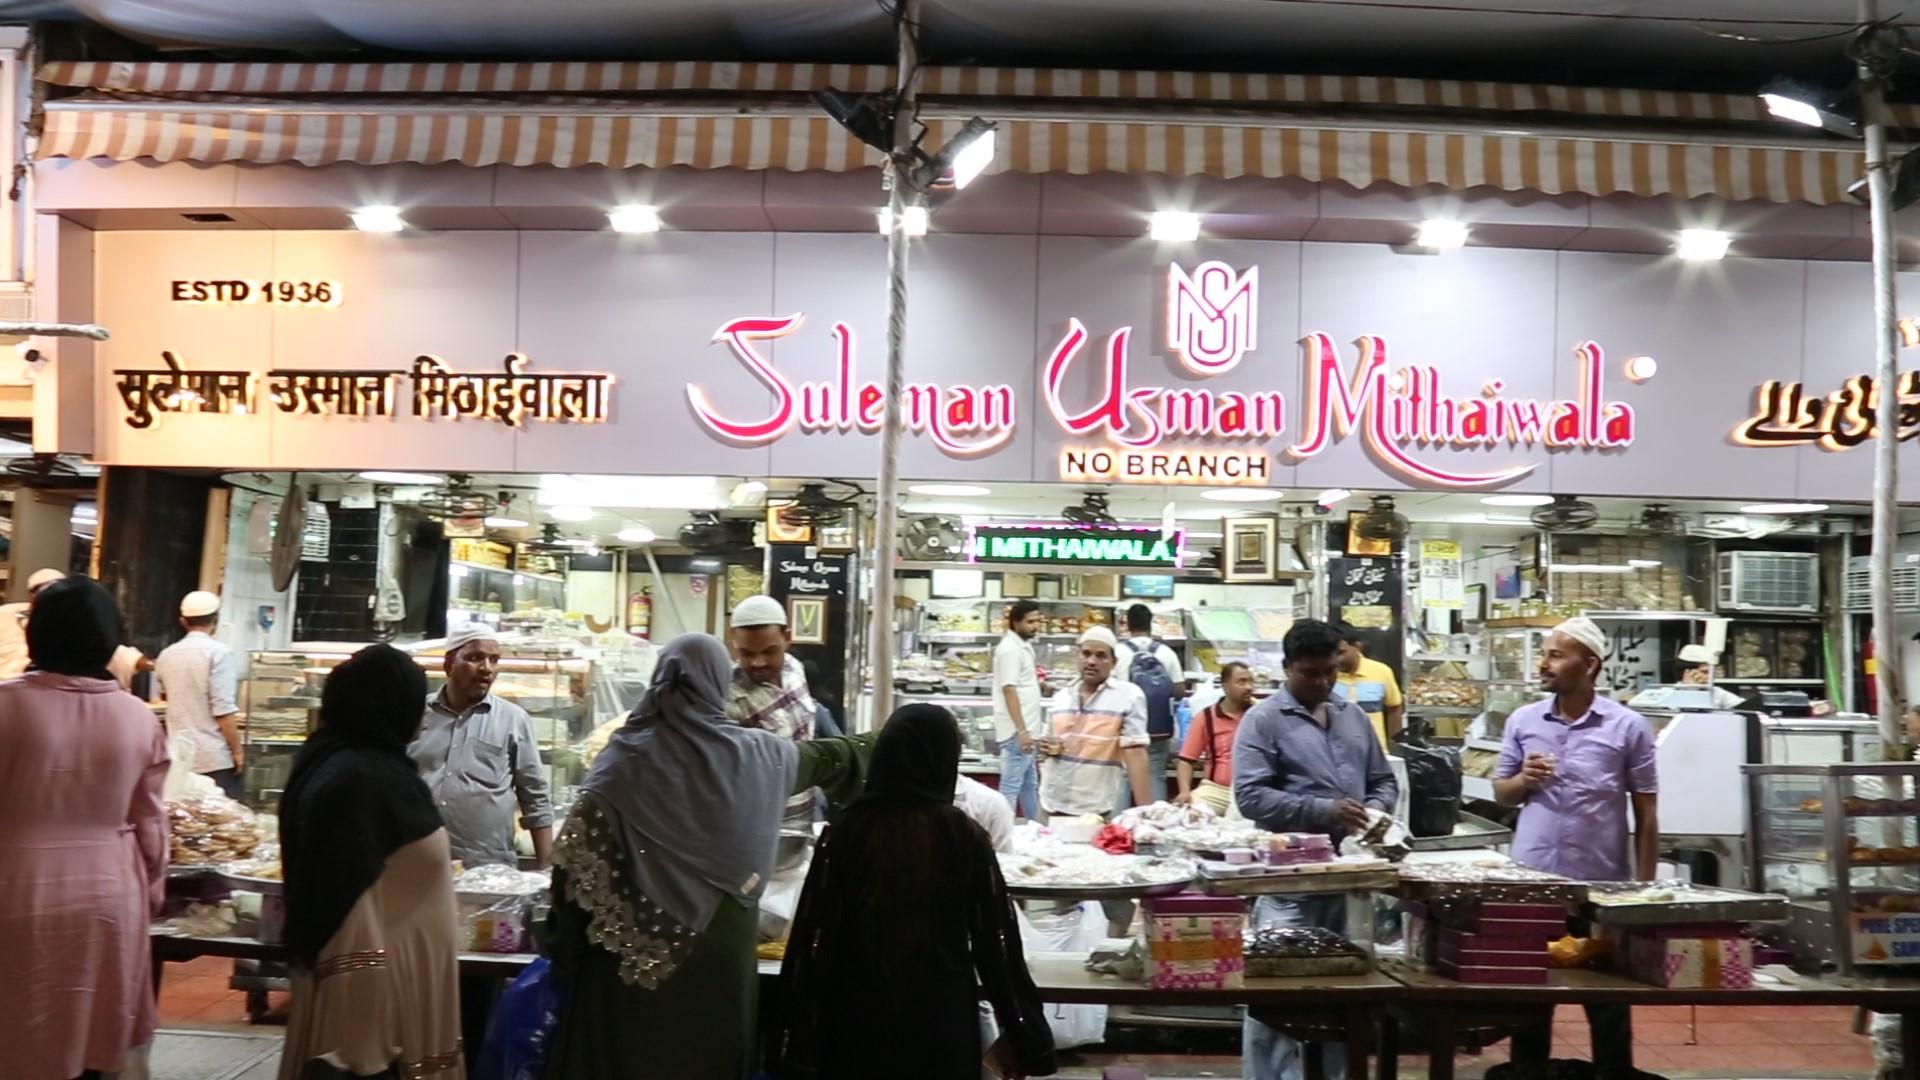 Just a stone's throw away from the pulsating sharbat is the iconic Sulaiman Usman Mithaiwala. Established in 1936, this sweet shop is one of the oldest and most revered ones in South Bombay. They offer a wide variety of exotic desserts like kesar firni, khwaja, fruit bowls, rabri all within the range of Rs 40 - Rs 100